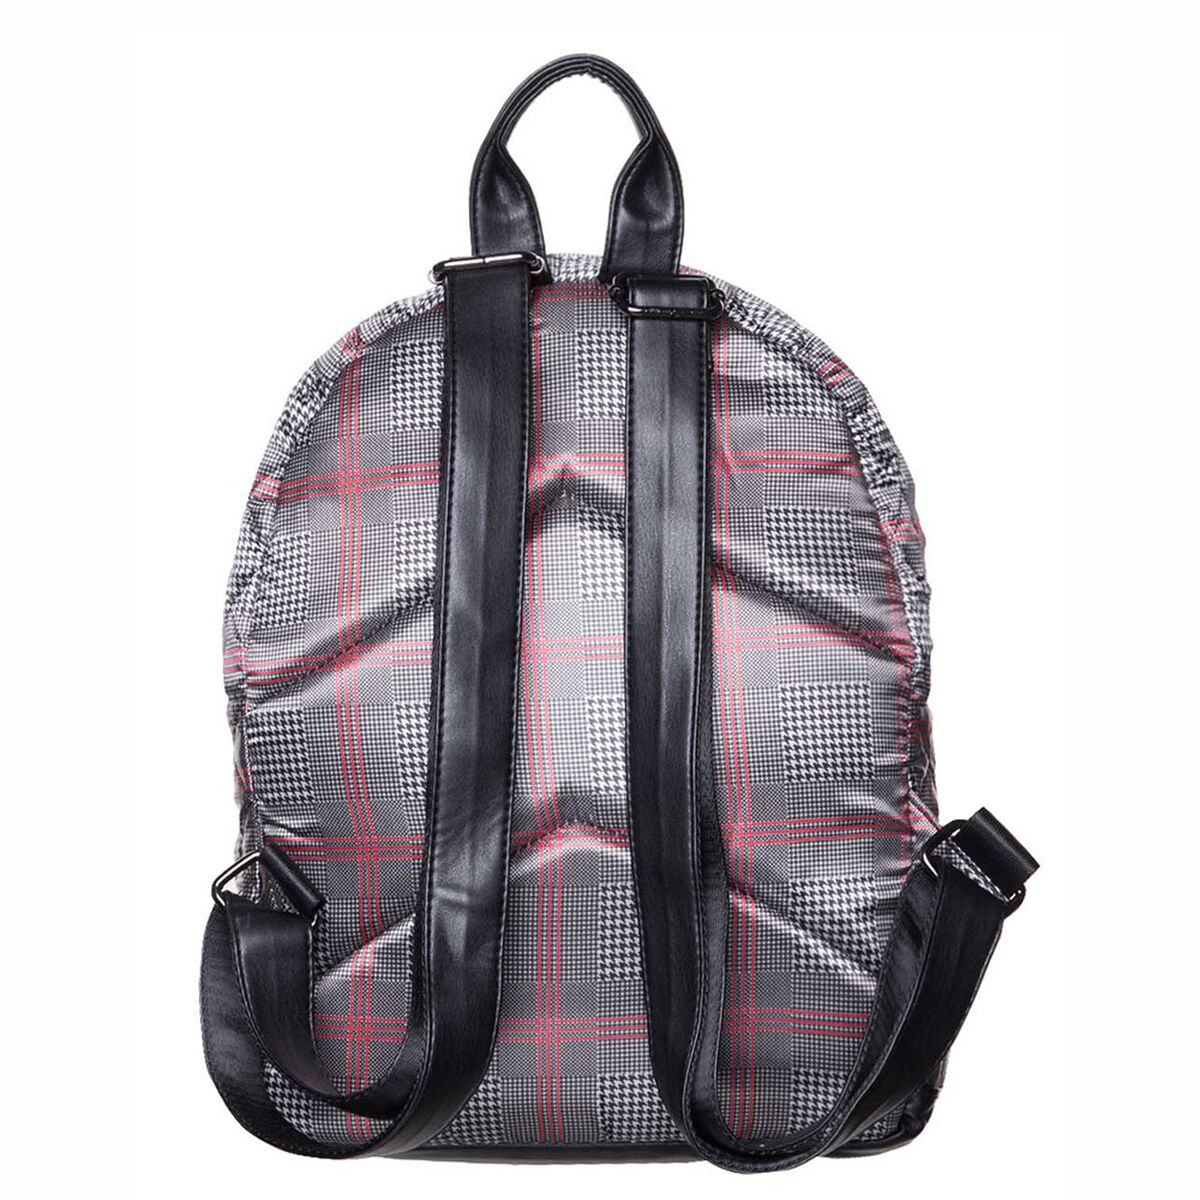 Mochila Quilted Pdg Oxford